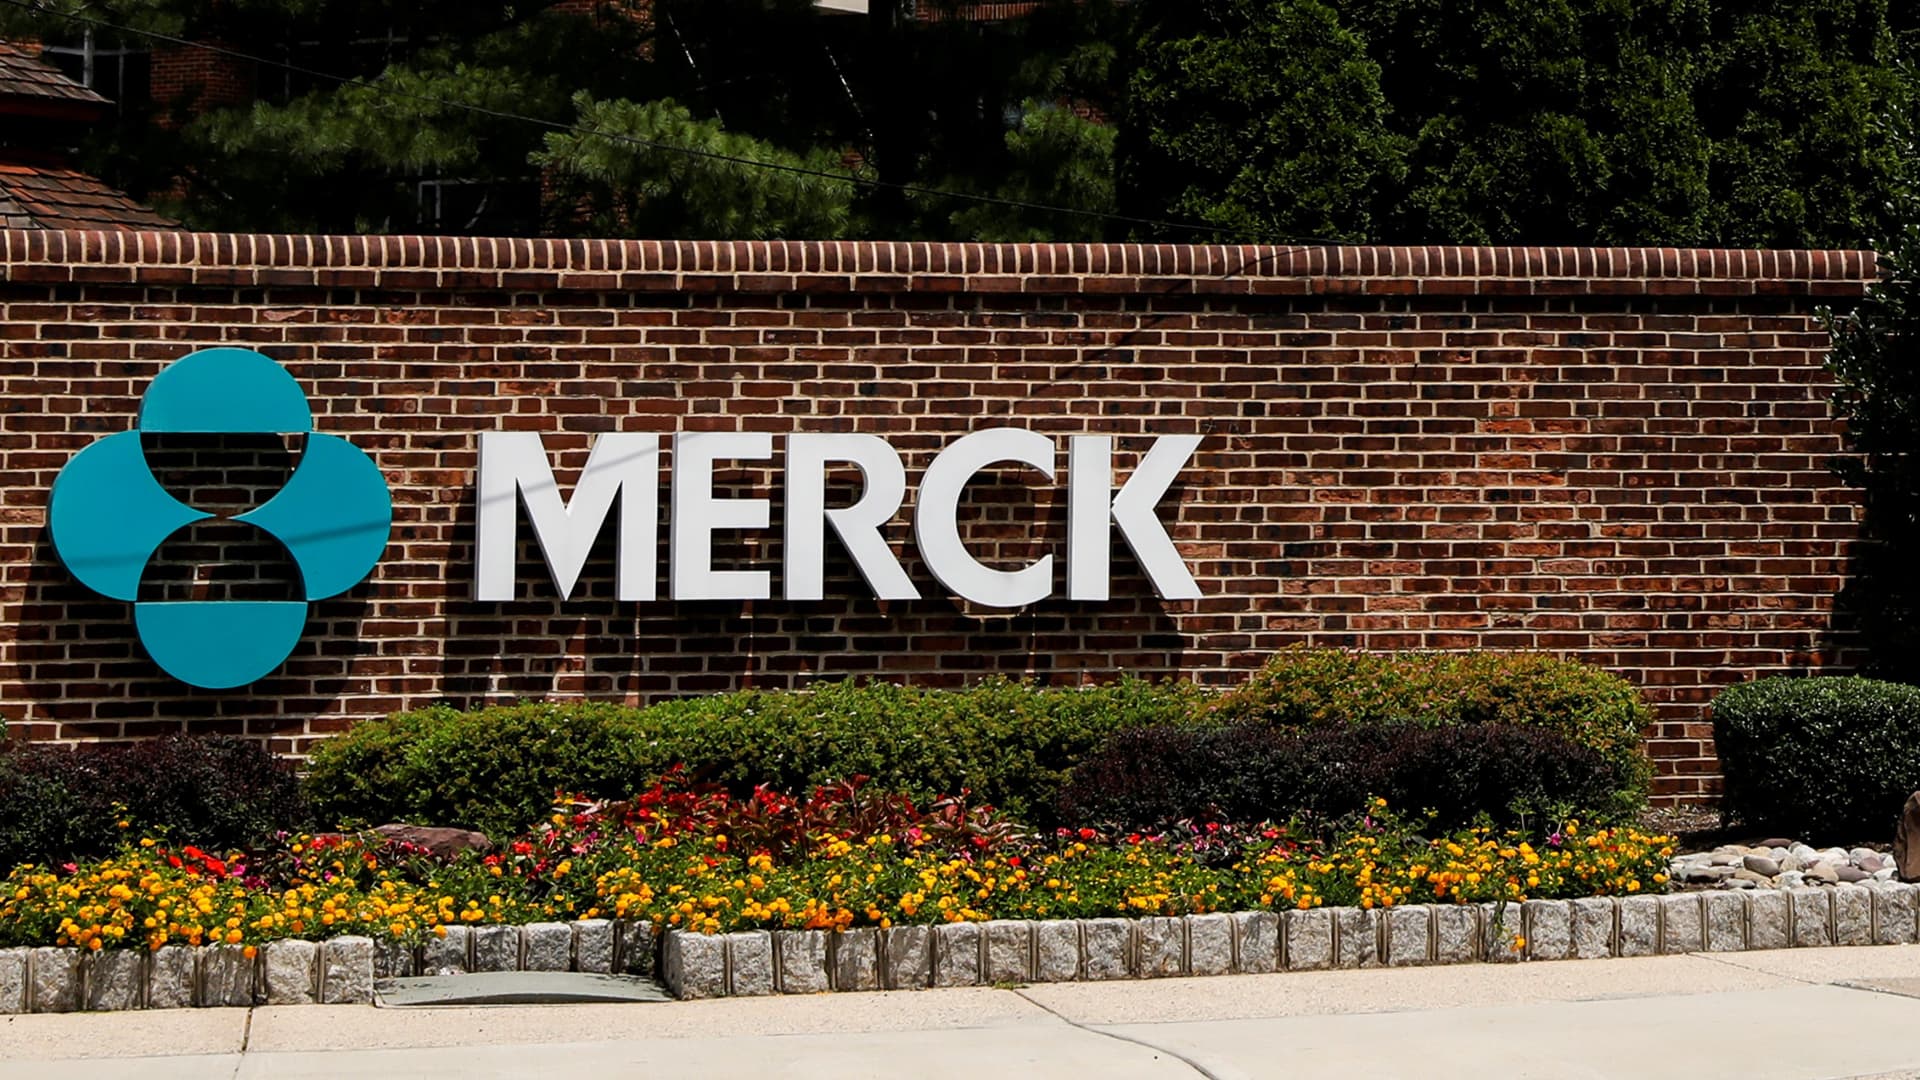 The Merck logo is seen at a gate to the Merck & Co campus in Rahway, New Jersey, U.S., July 12, 2018.